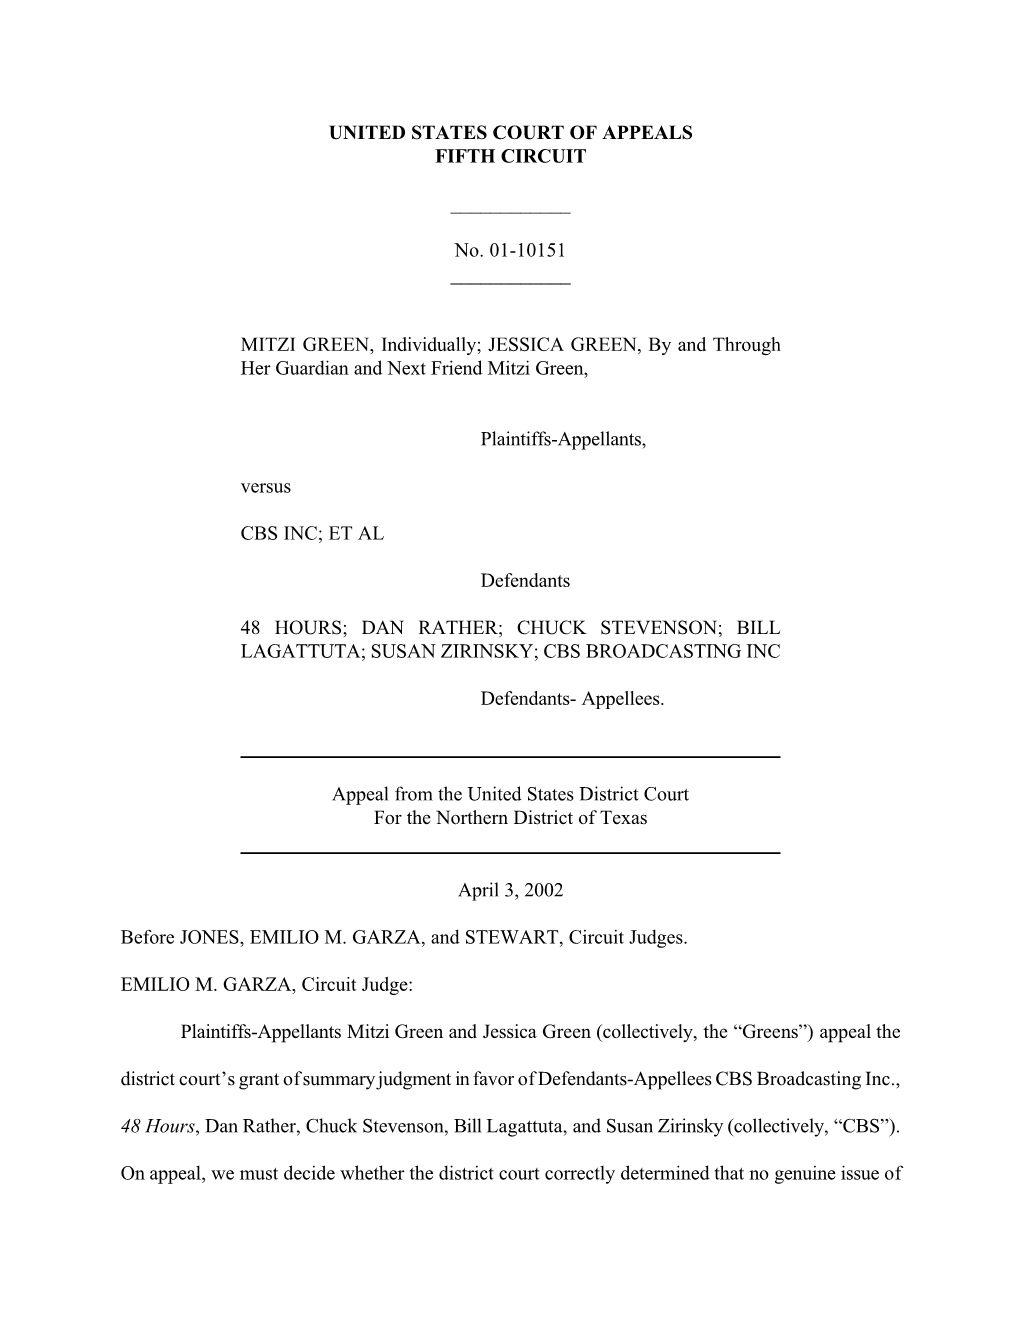 UNITED STATES COURT of APPEALS FIFTH CIRCUIT ___No. 01-10151 ___MITZI GREEN, Individually; JESSICA GREEN, By